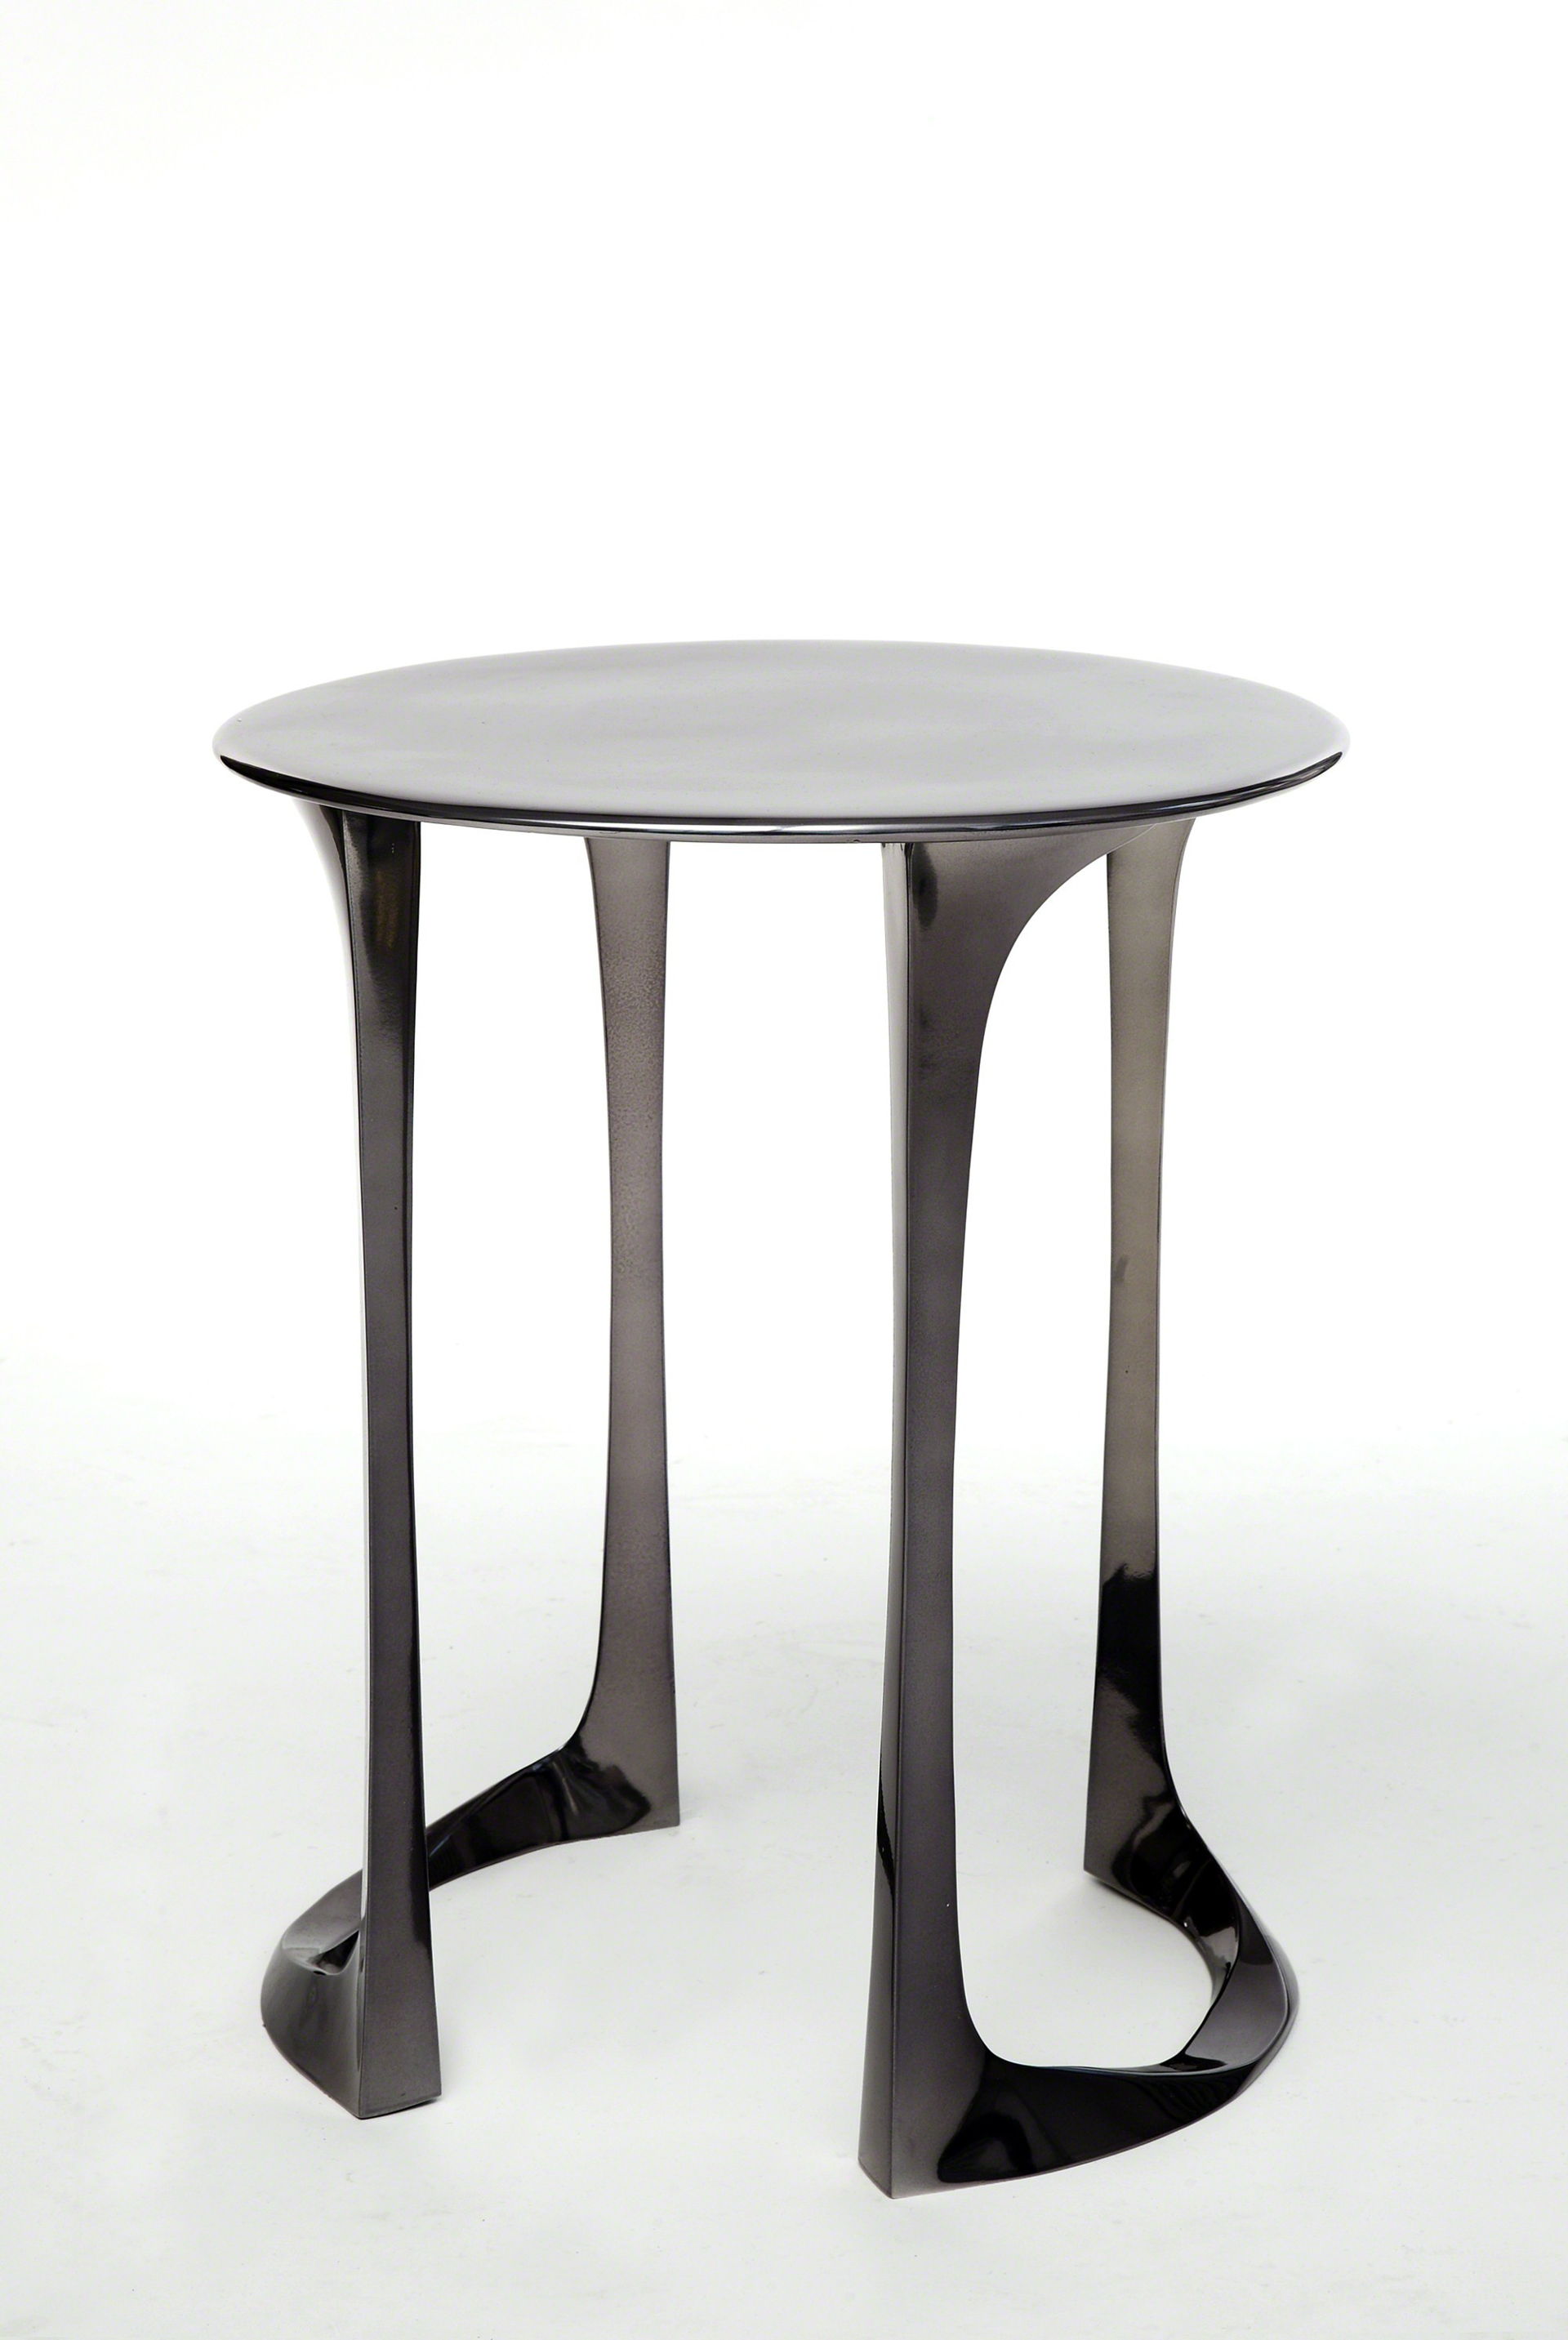 Bronze Side tables by Anasthasia Millot